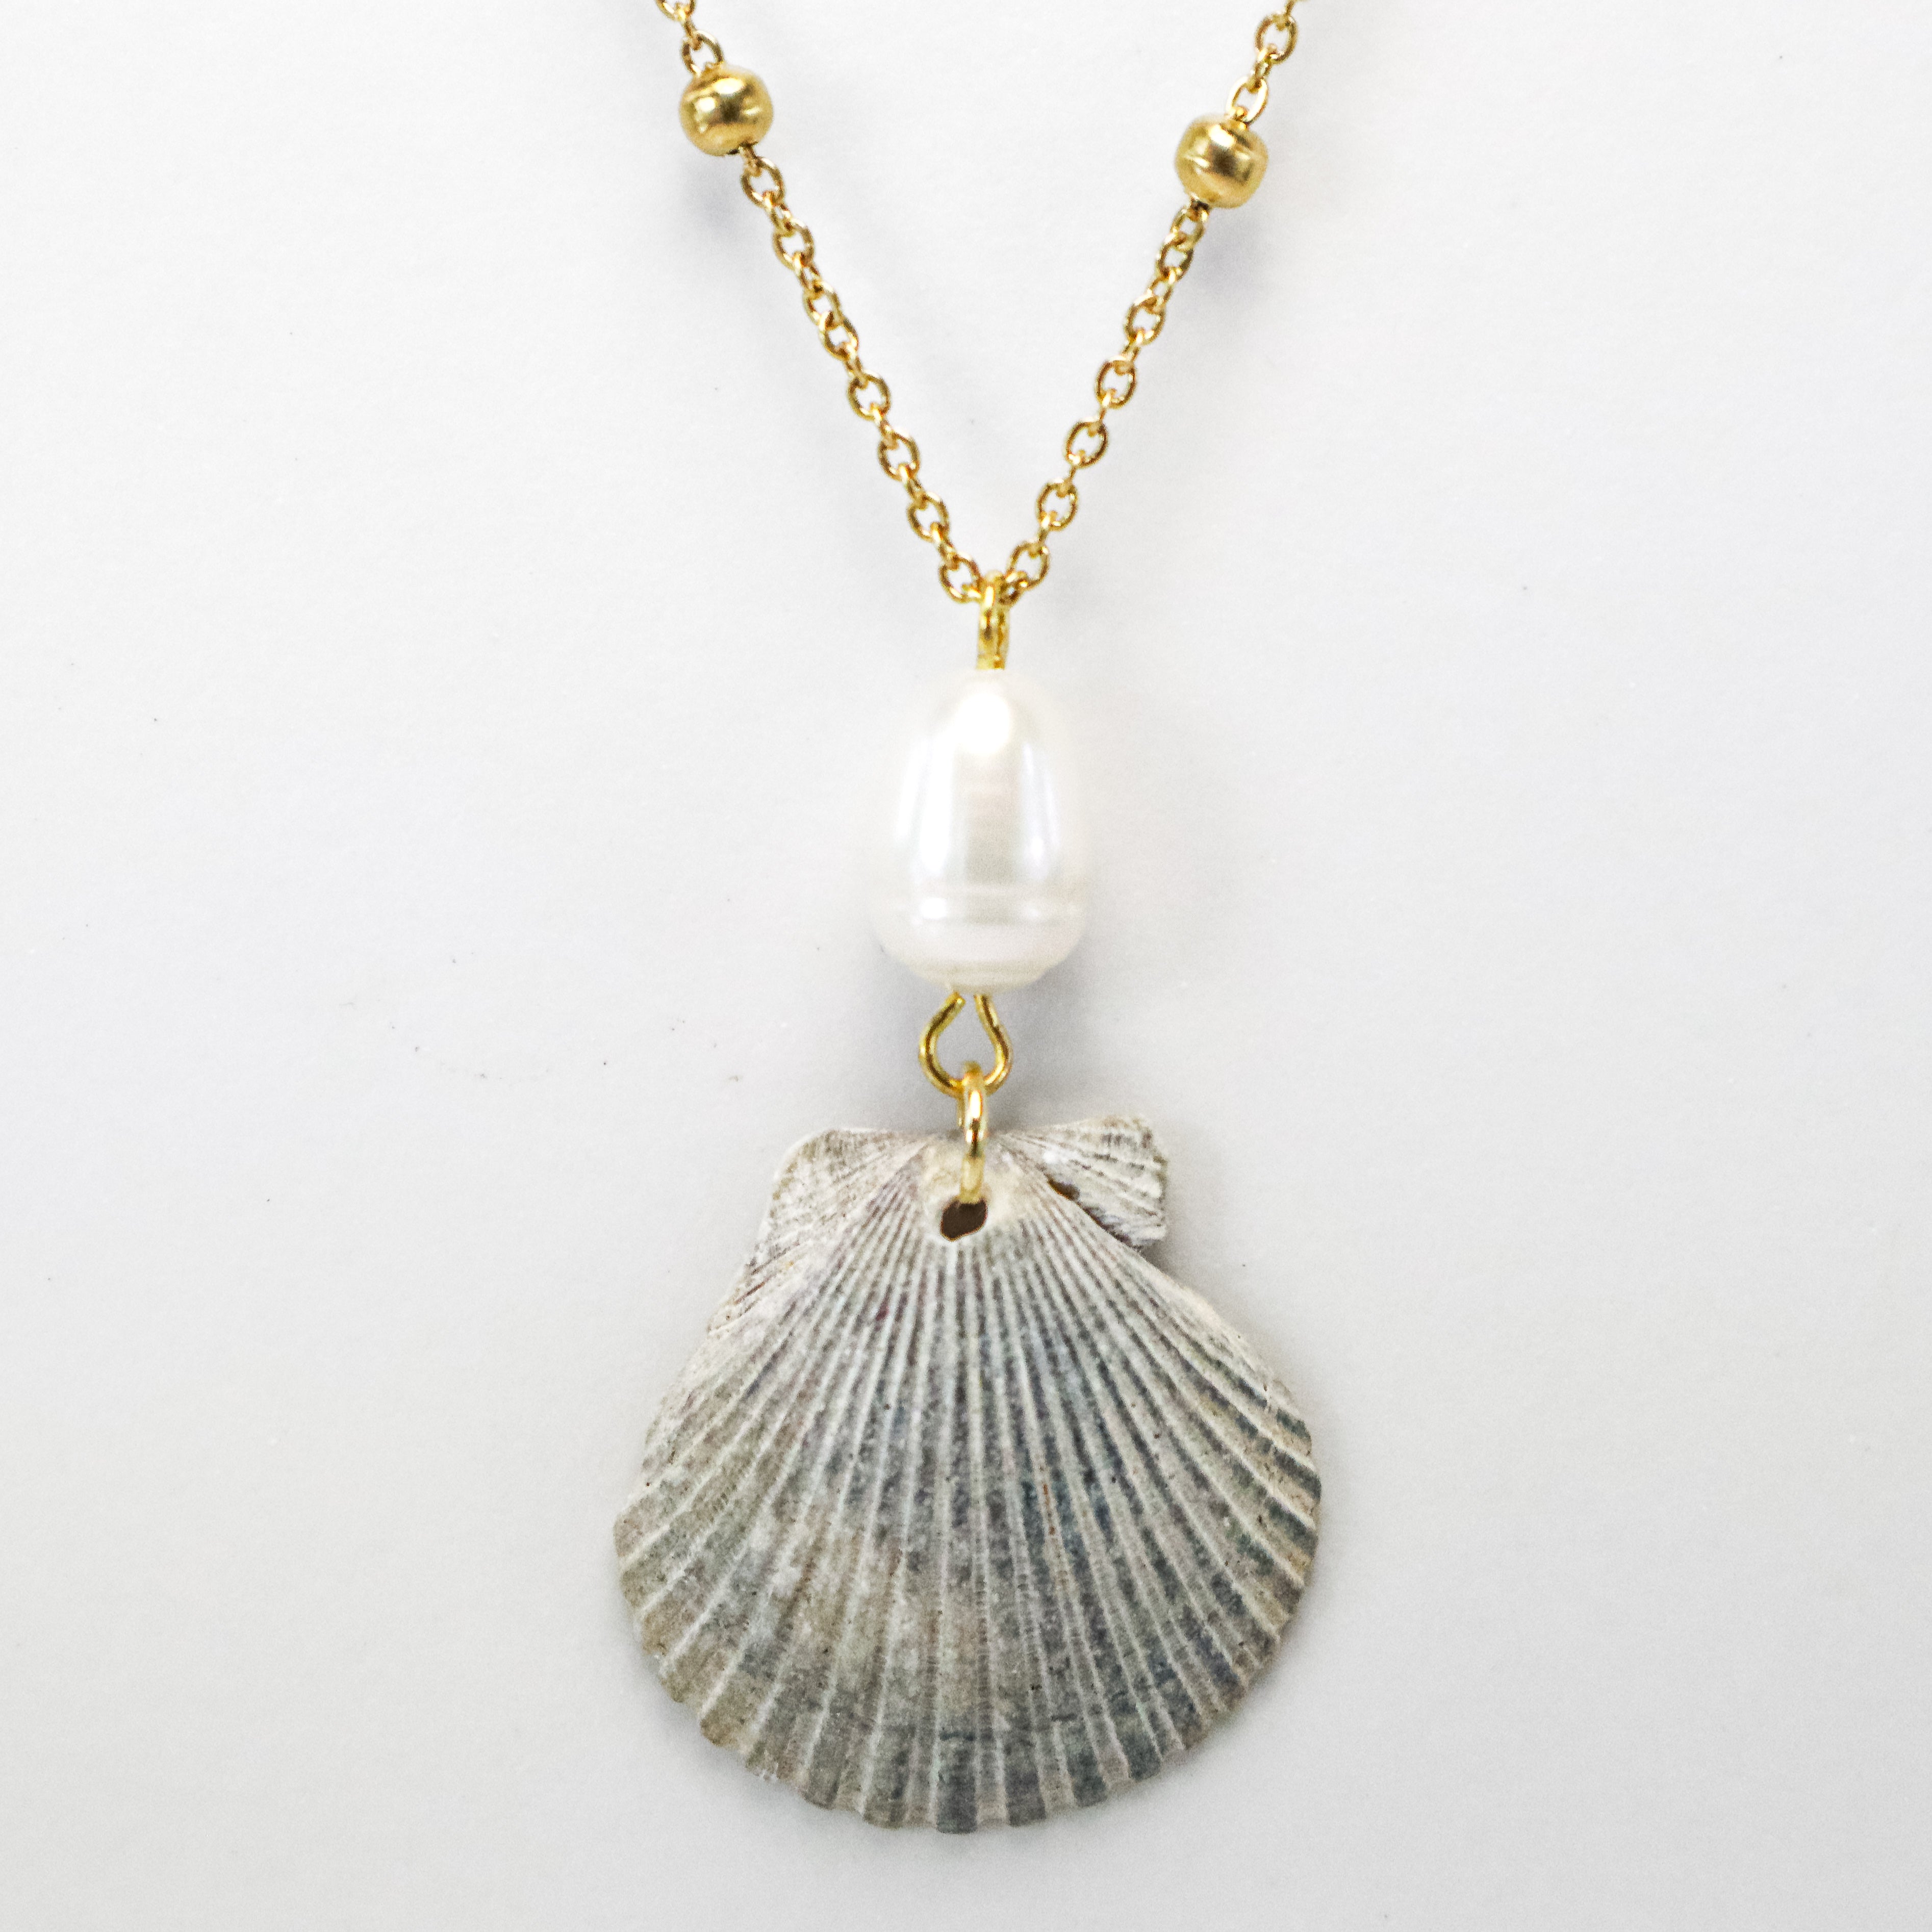 Ariel’s Shell Necklace